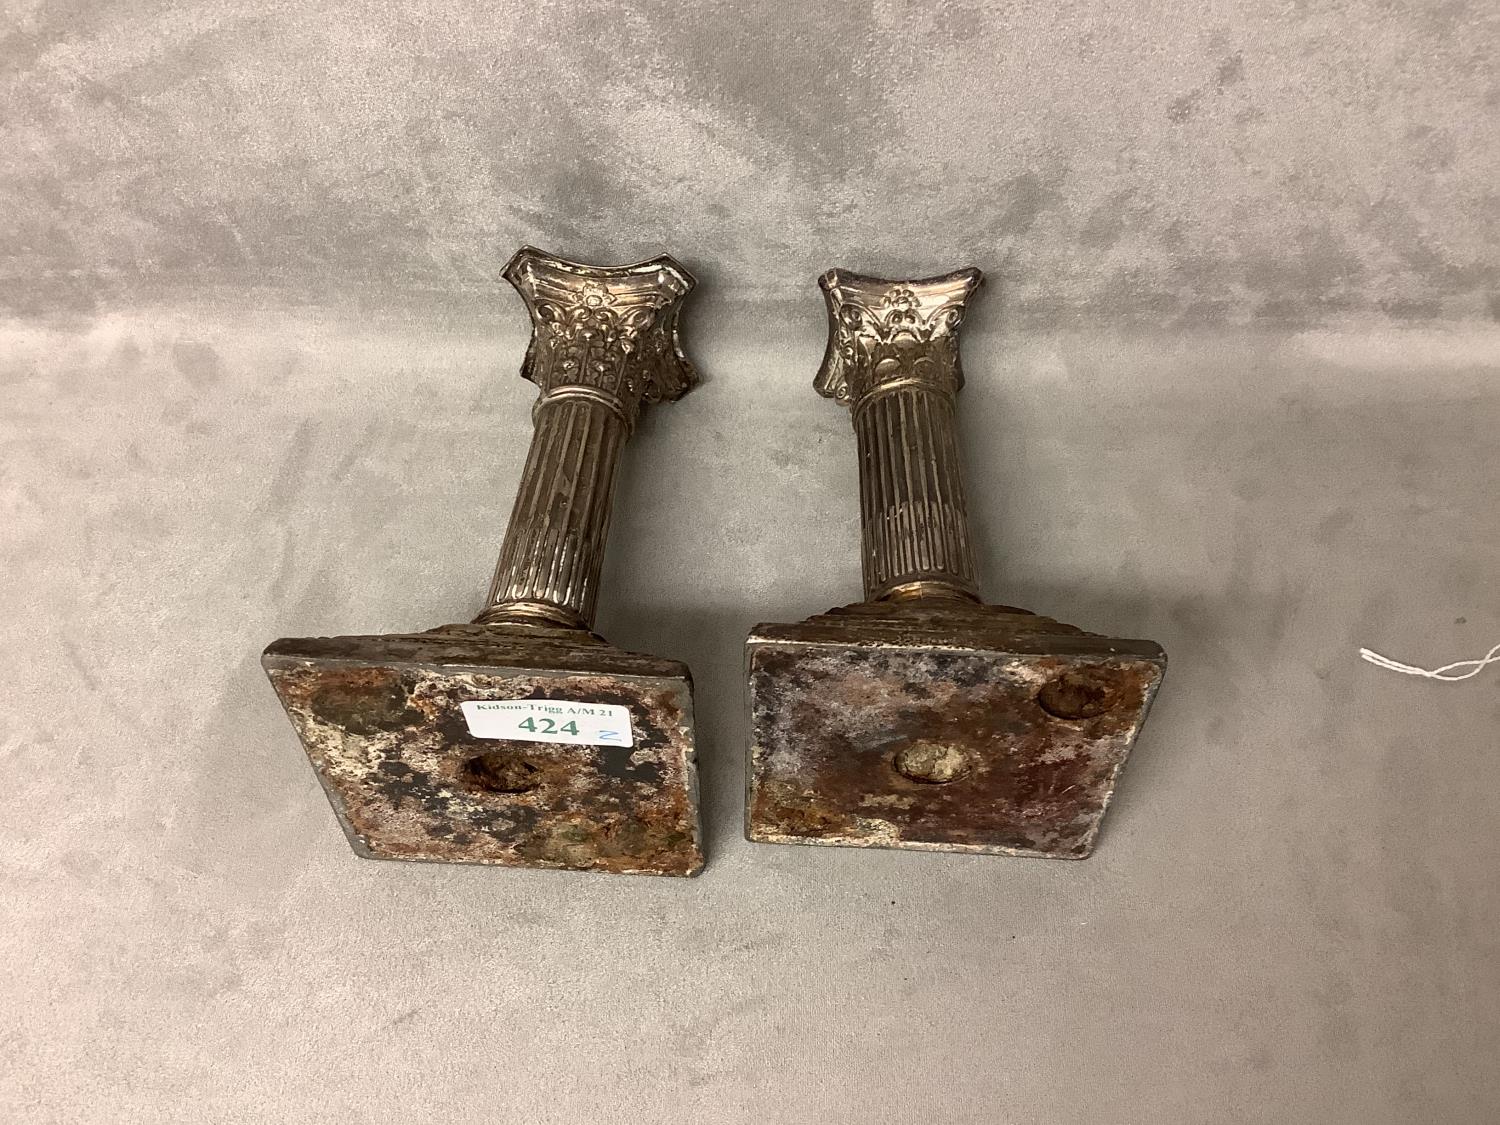 Two similar hallmarked silver weighted column candlesticks 15 cm H Condition tarnished and damage, - Image 3 of 3